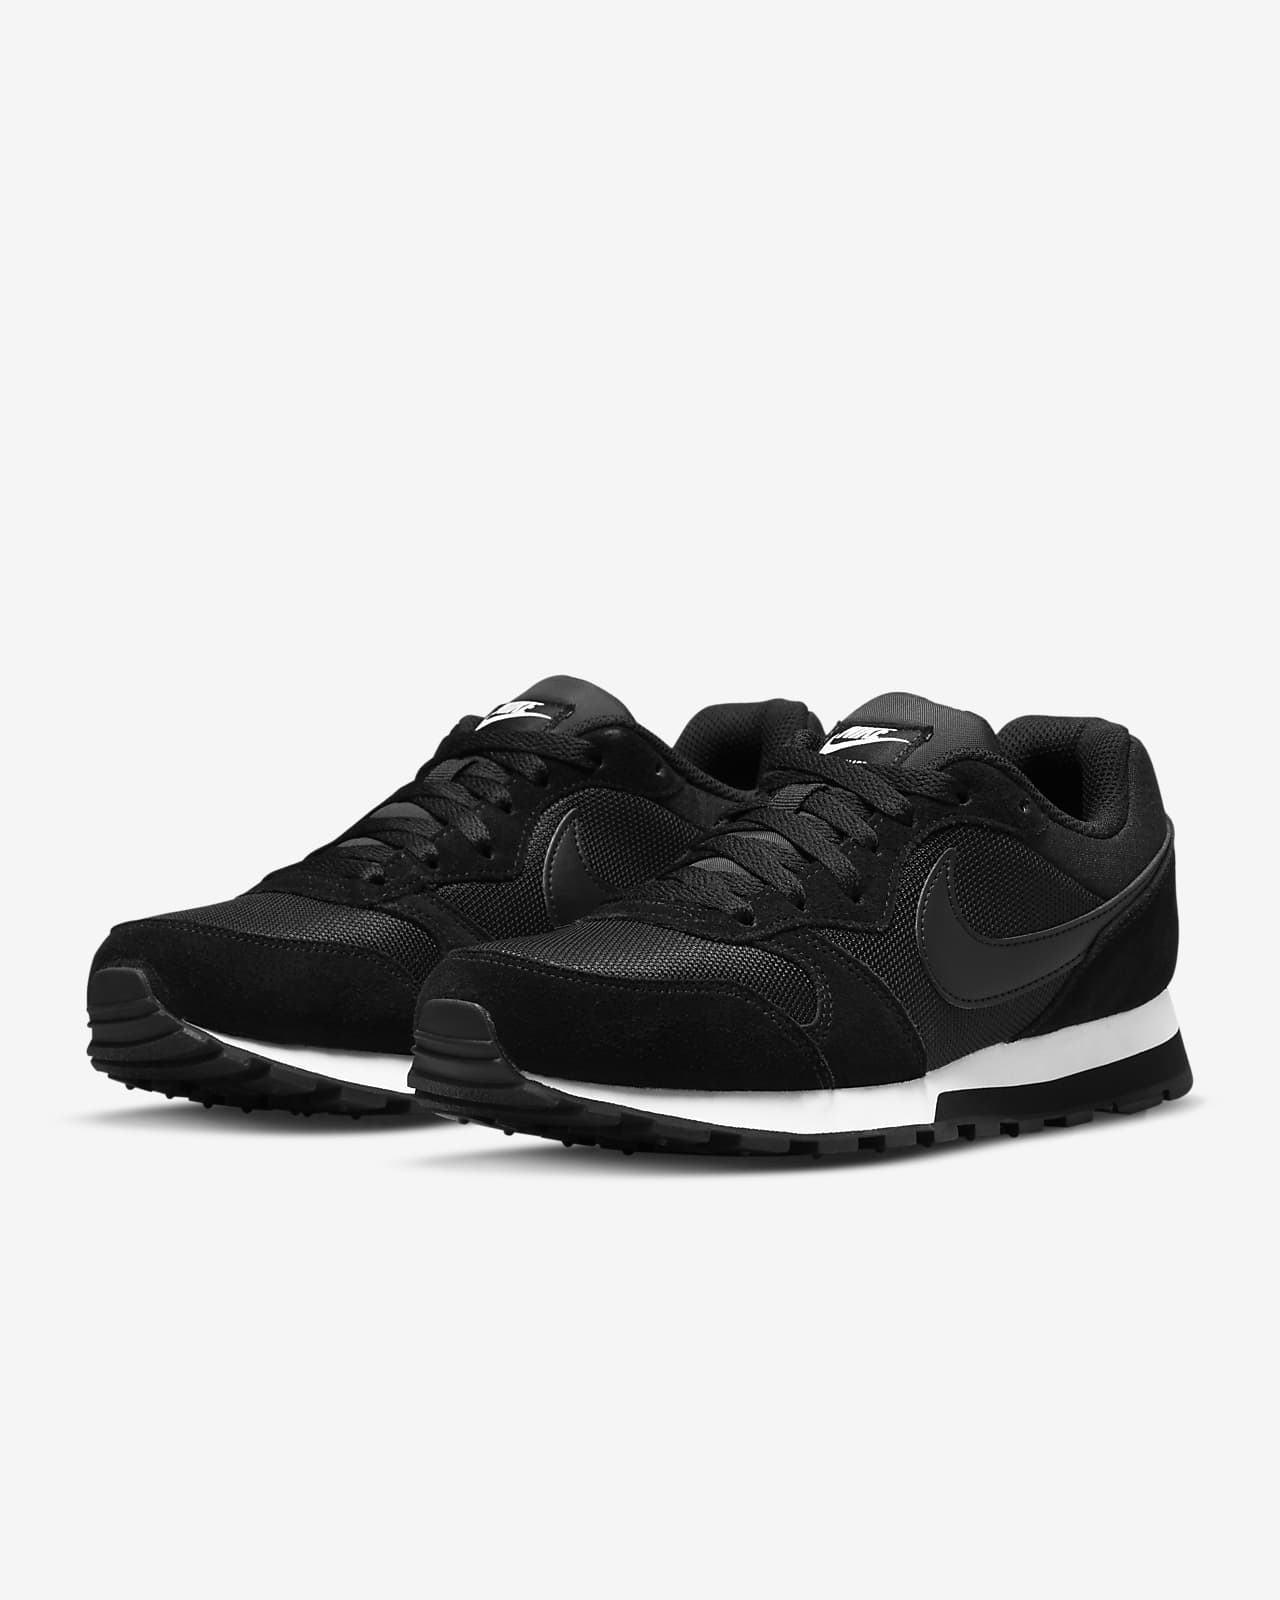 Anesthetic Bakery Outcome Chaussure Nike MD Runner 2 pour Femme. Nike FR